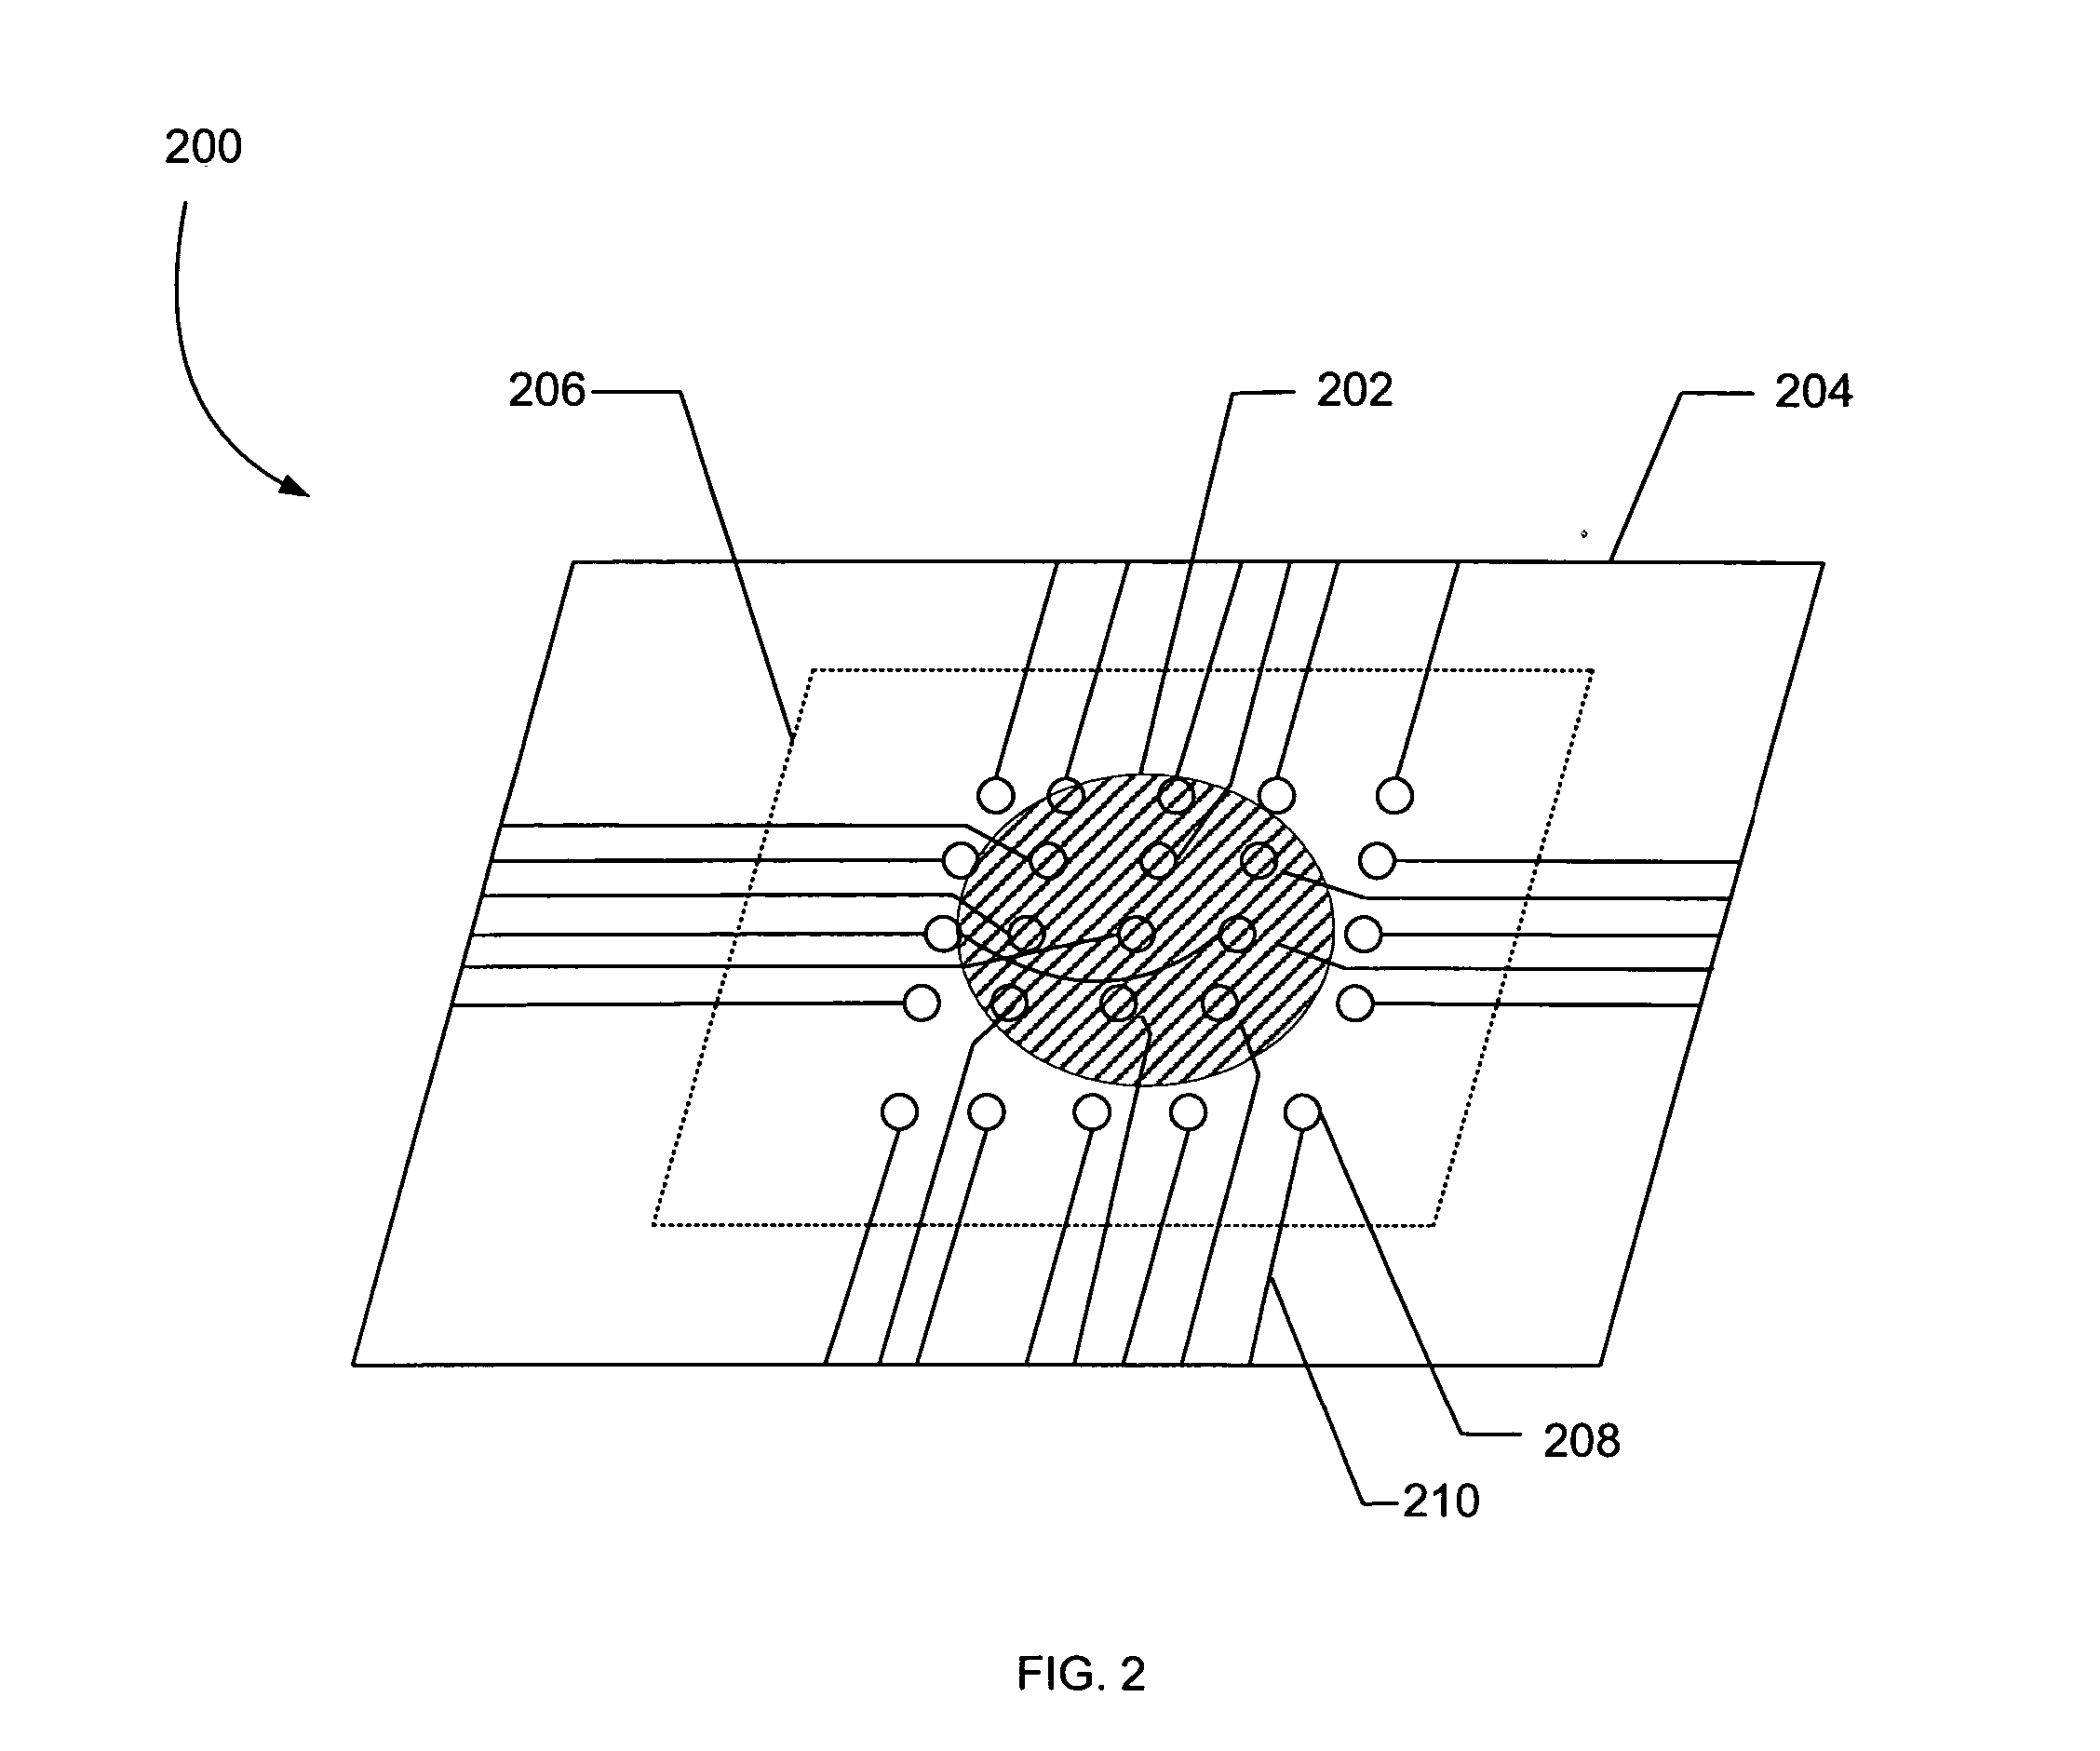 Systems and methods for calibrating osmolarity measuring devices